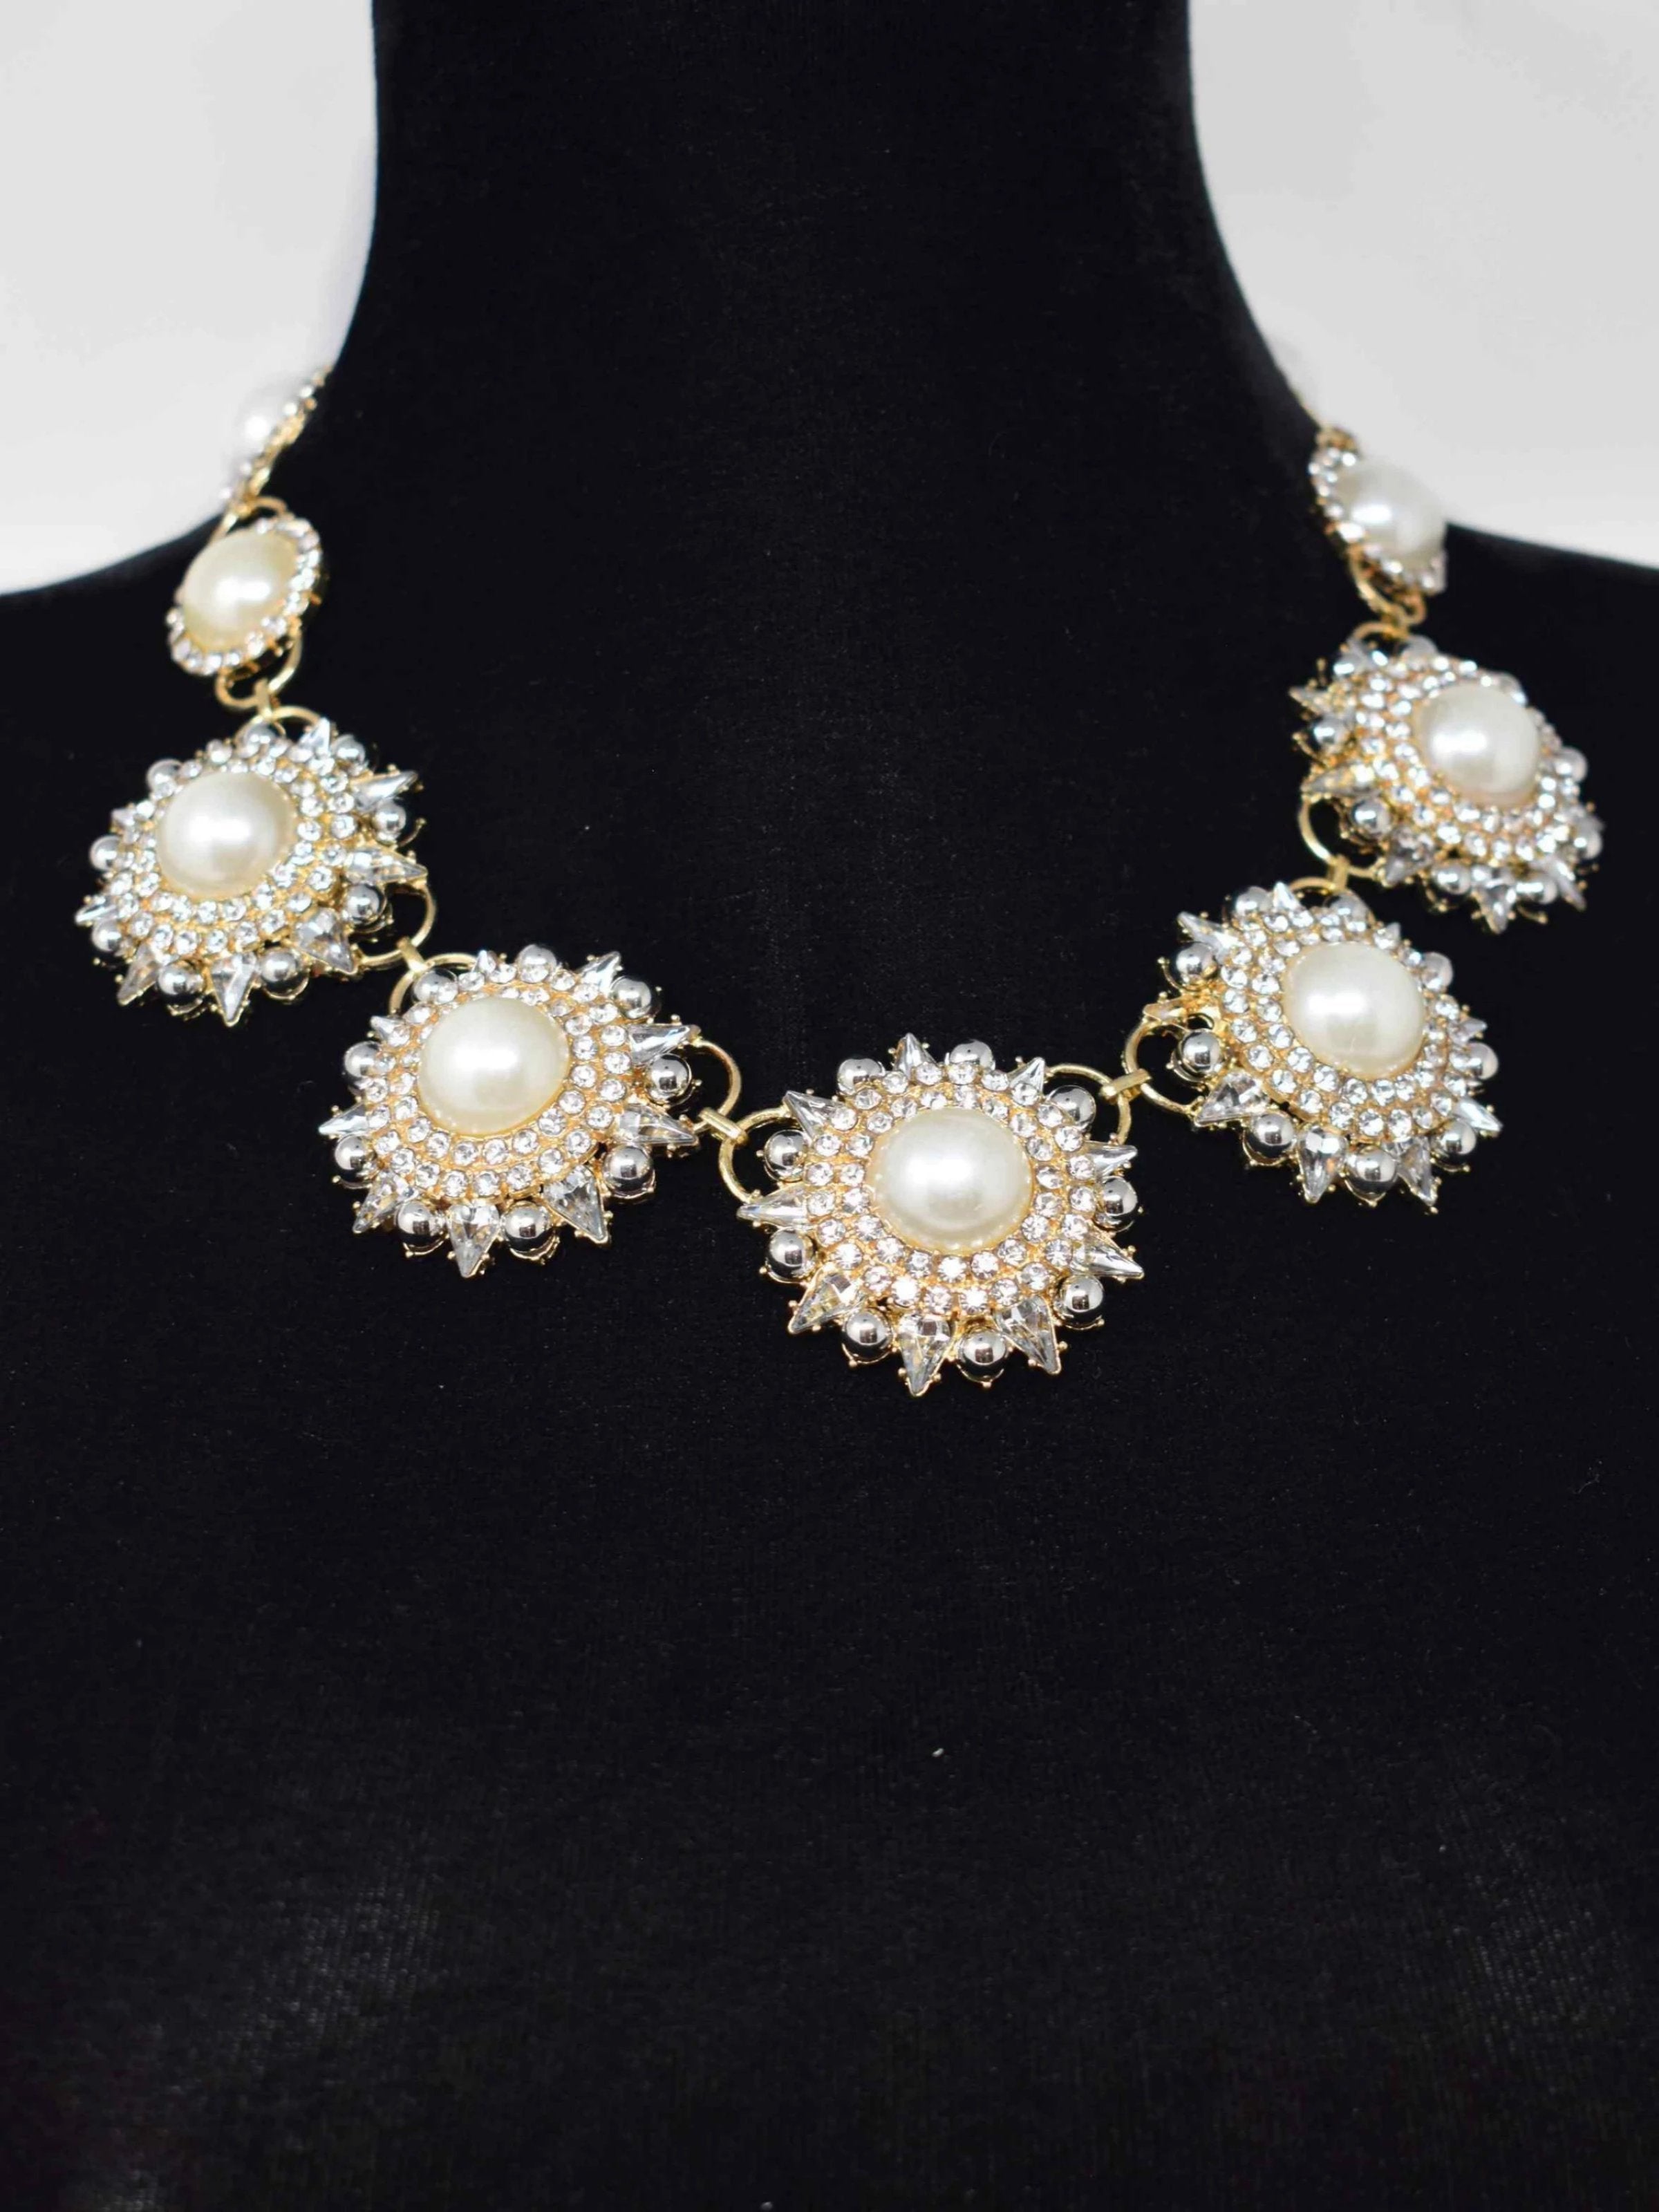 Our Rica statement necklace will add an elegant stylish glow to your outfit. This Gold and pearl floral linked necklace is accented with stones and closes with a lobster clasp. It measures 10 1/2" in length.